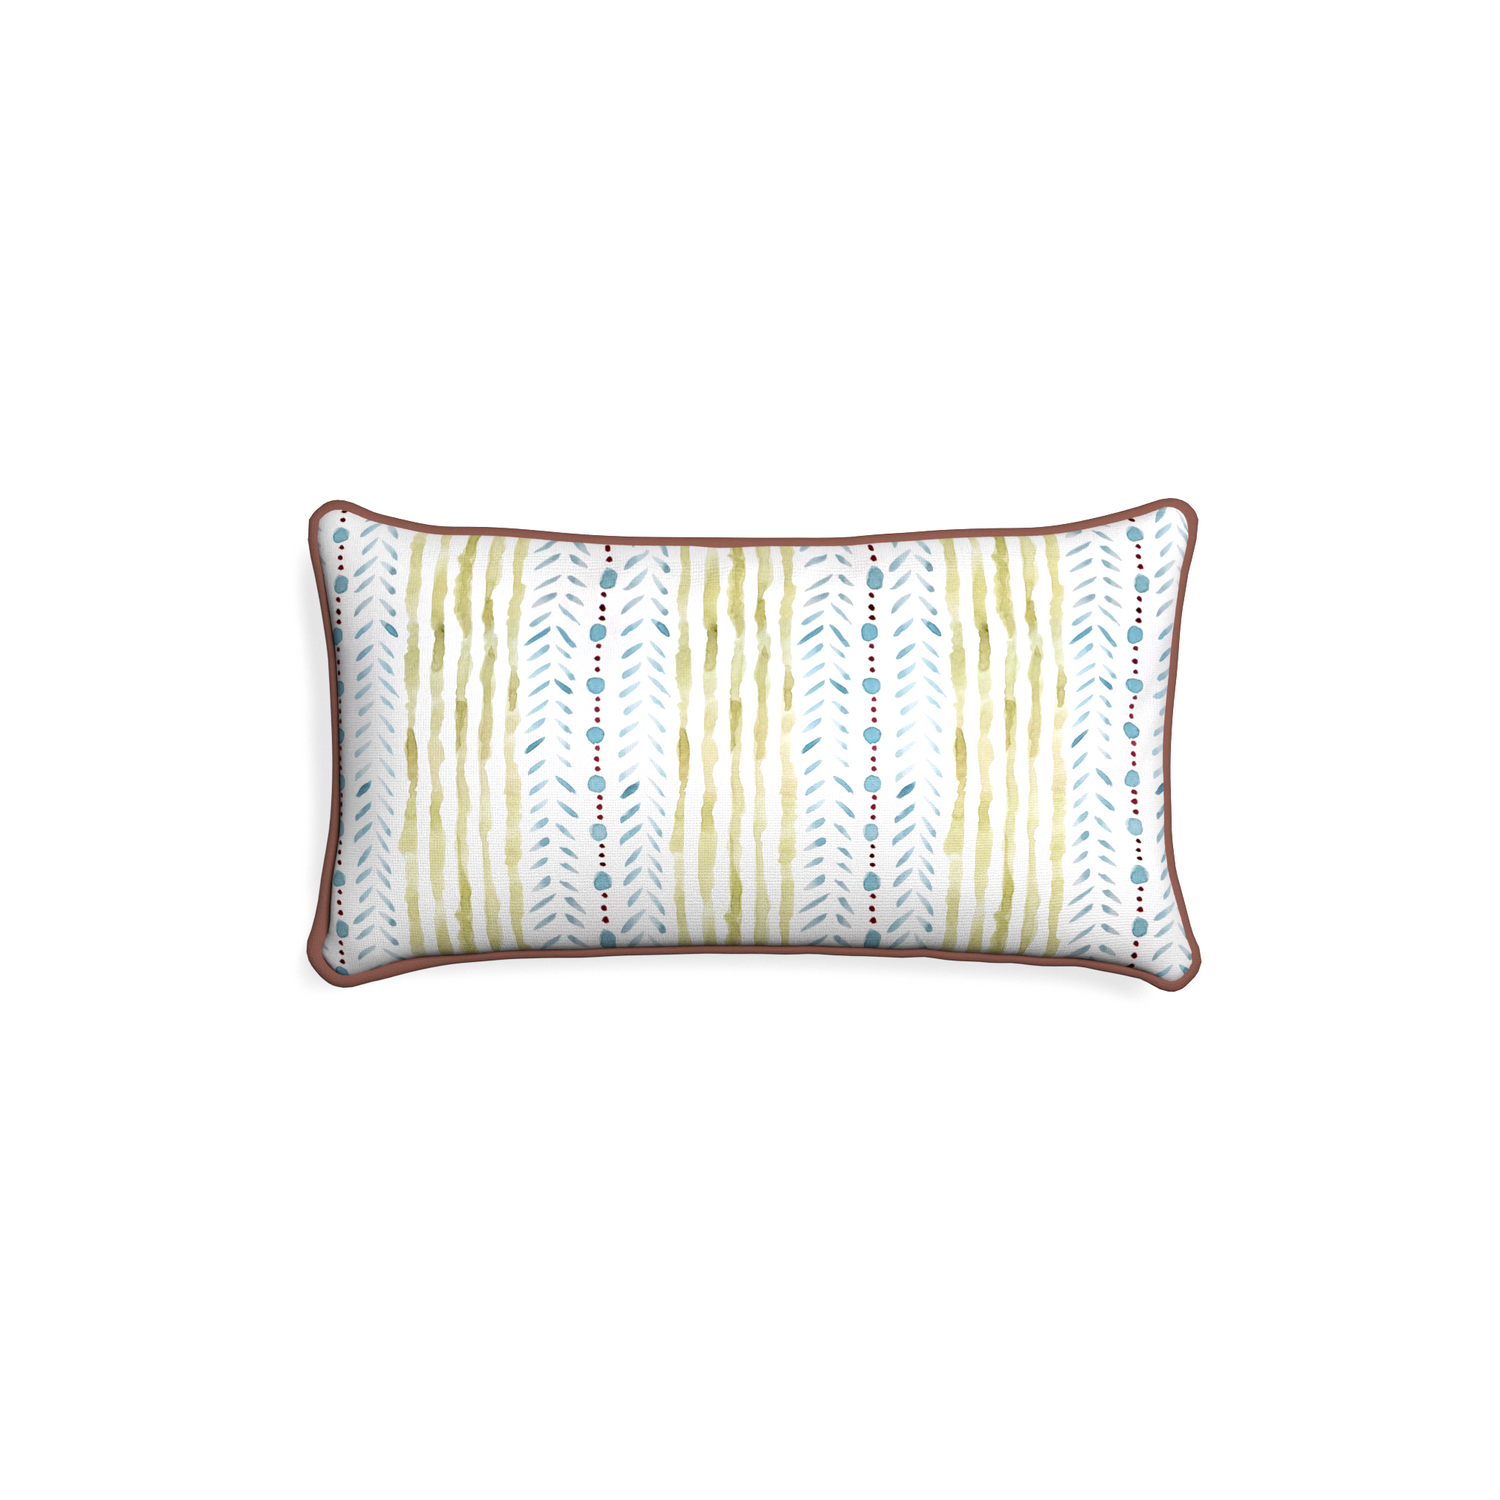 Petite-lumbar julia custom blue & green stripedpillow with w piping on white background